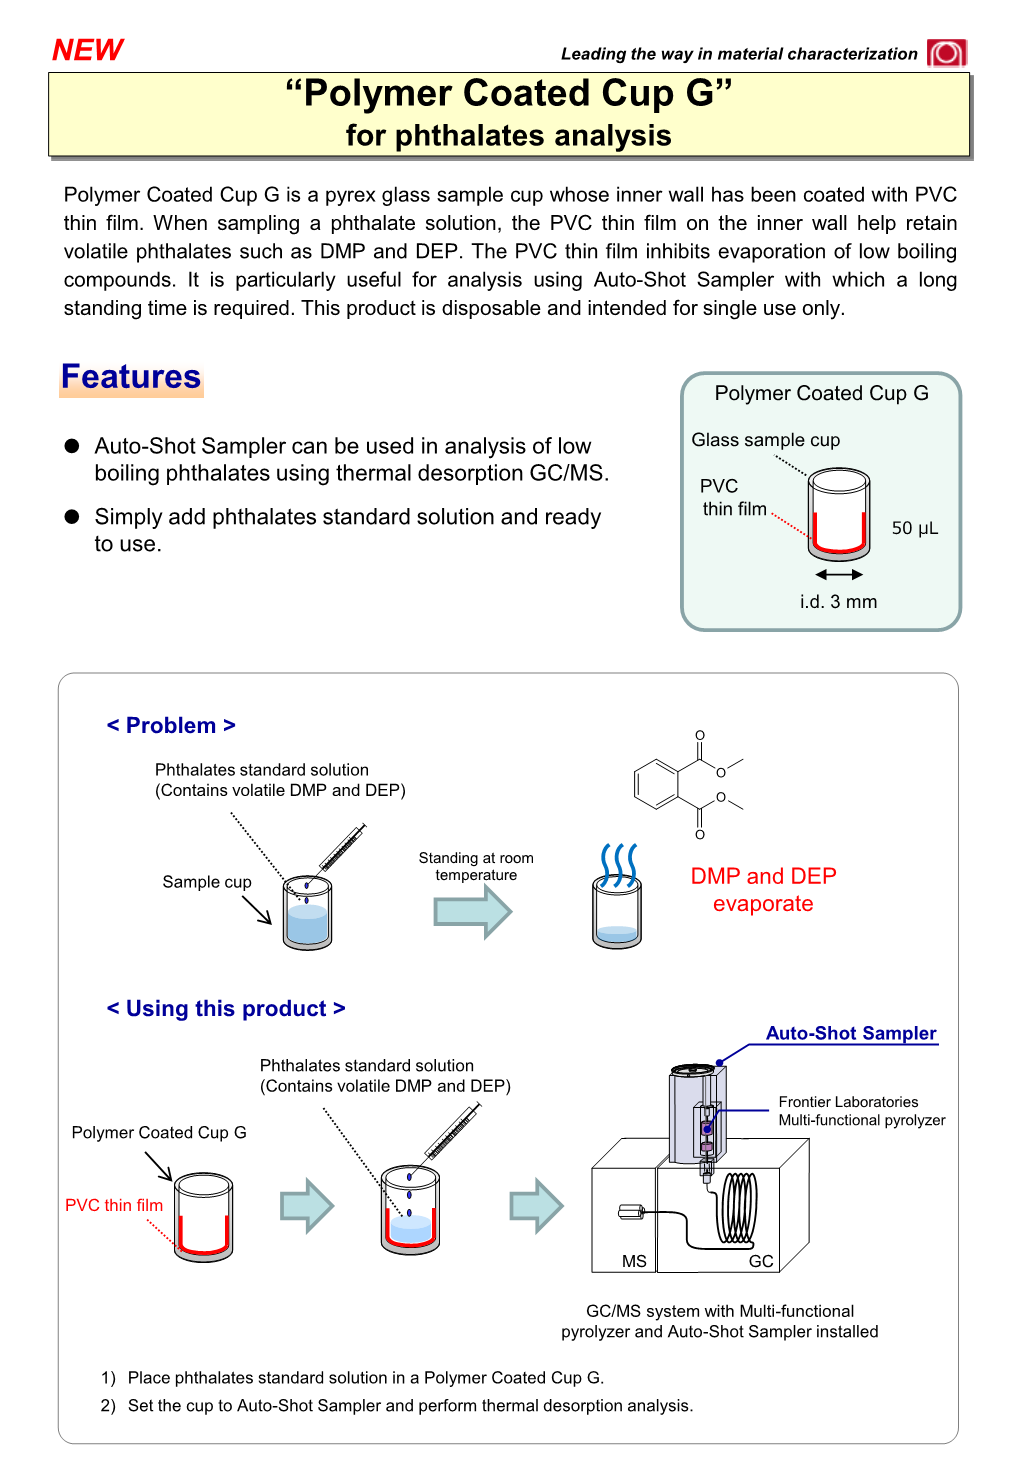 “Polymer Coated Cup G” for Phthalates Analysis